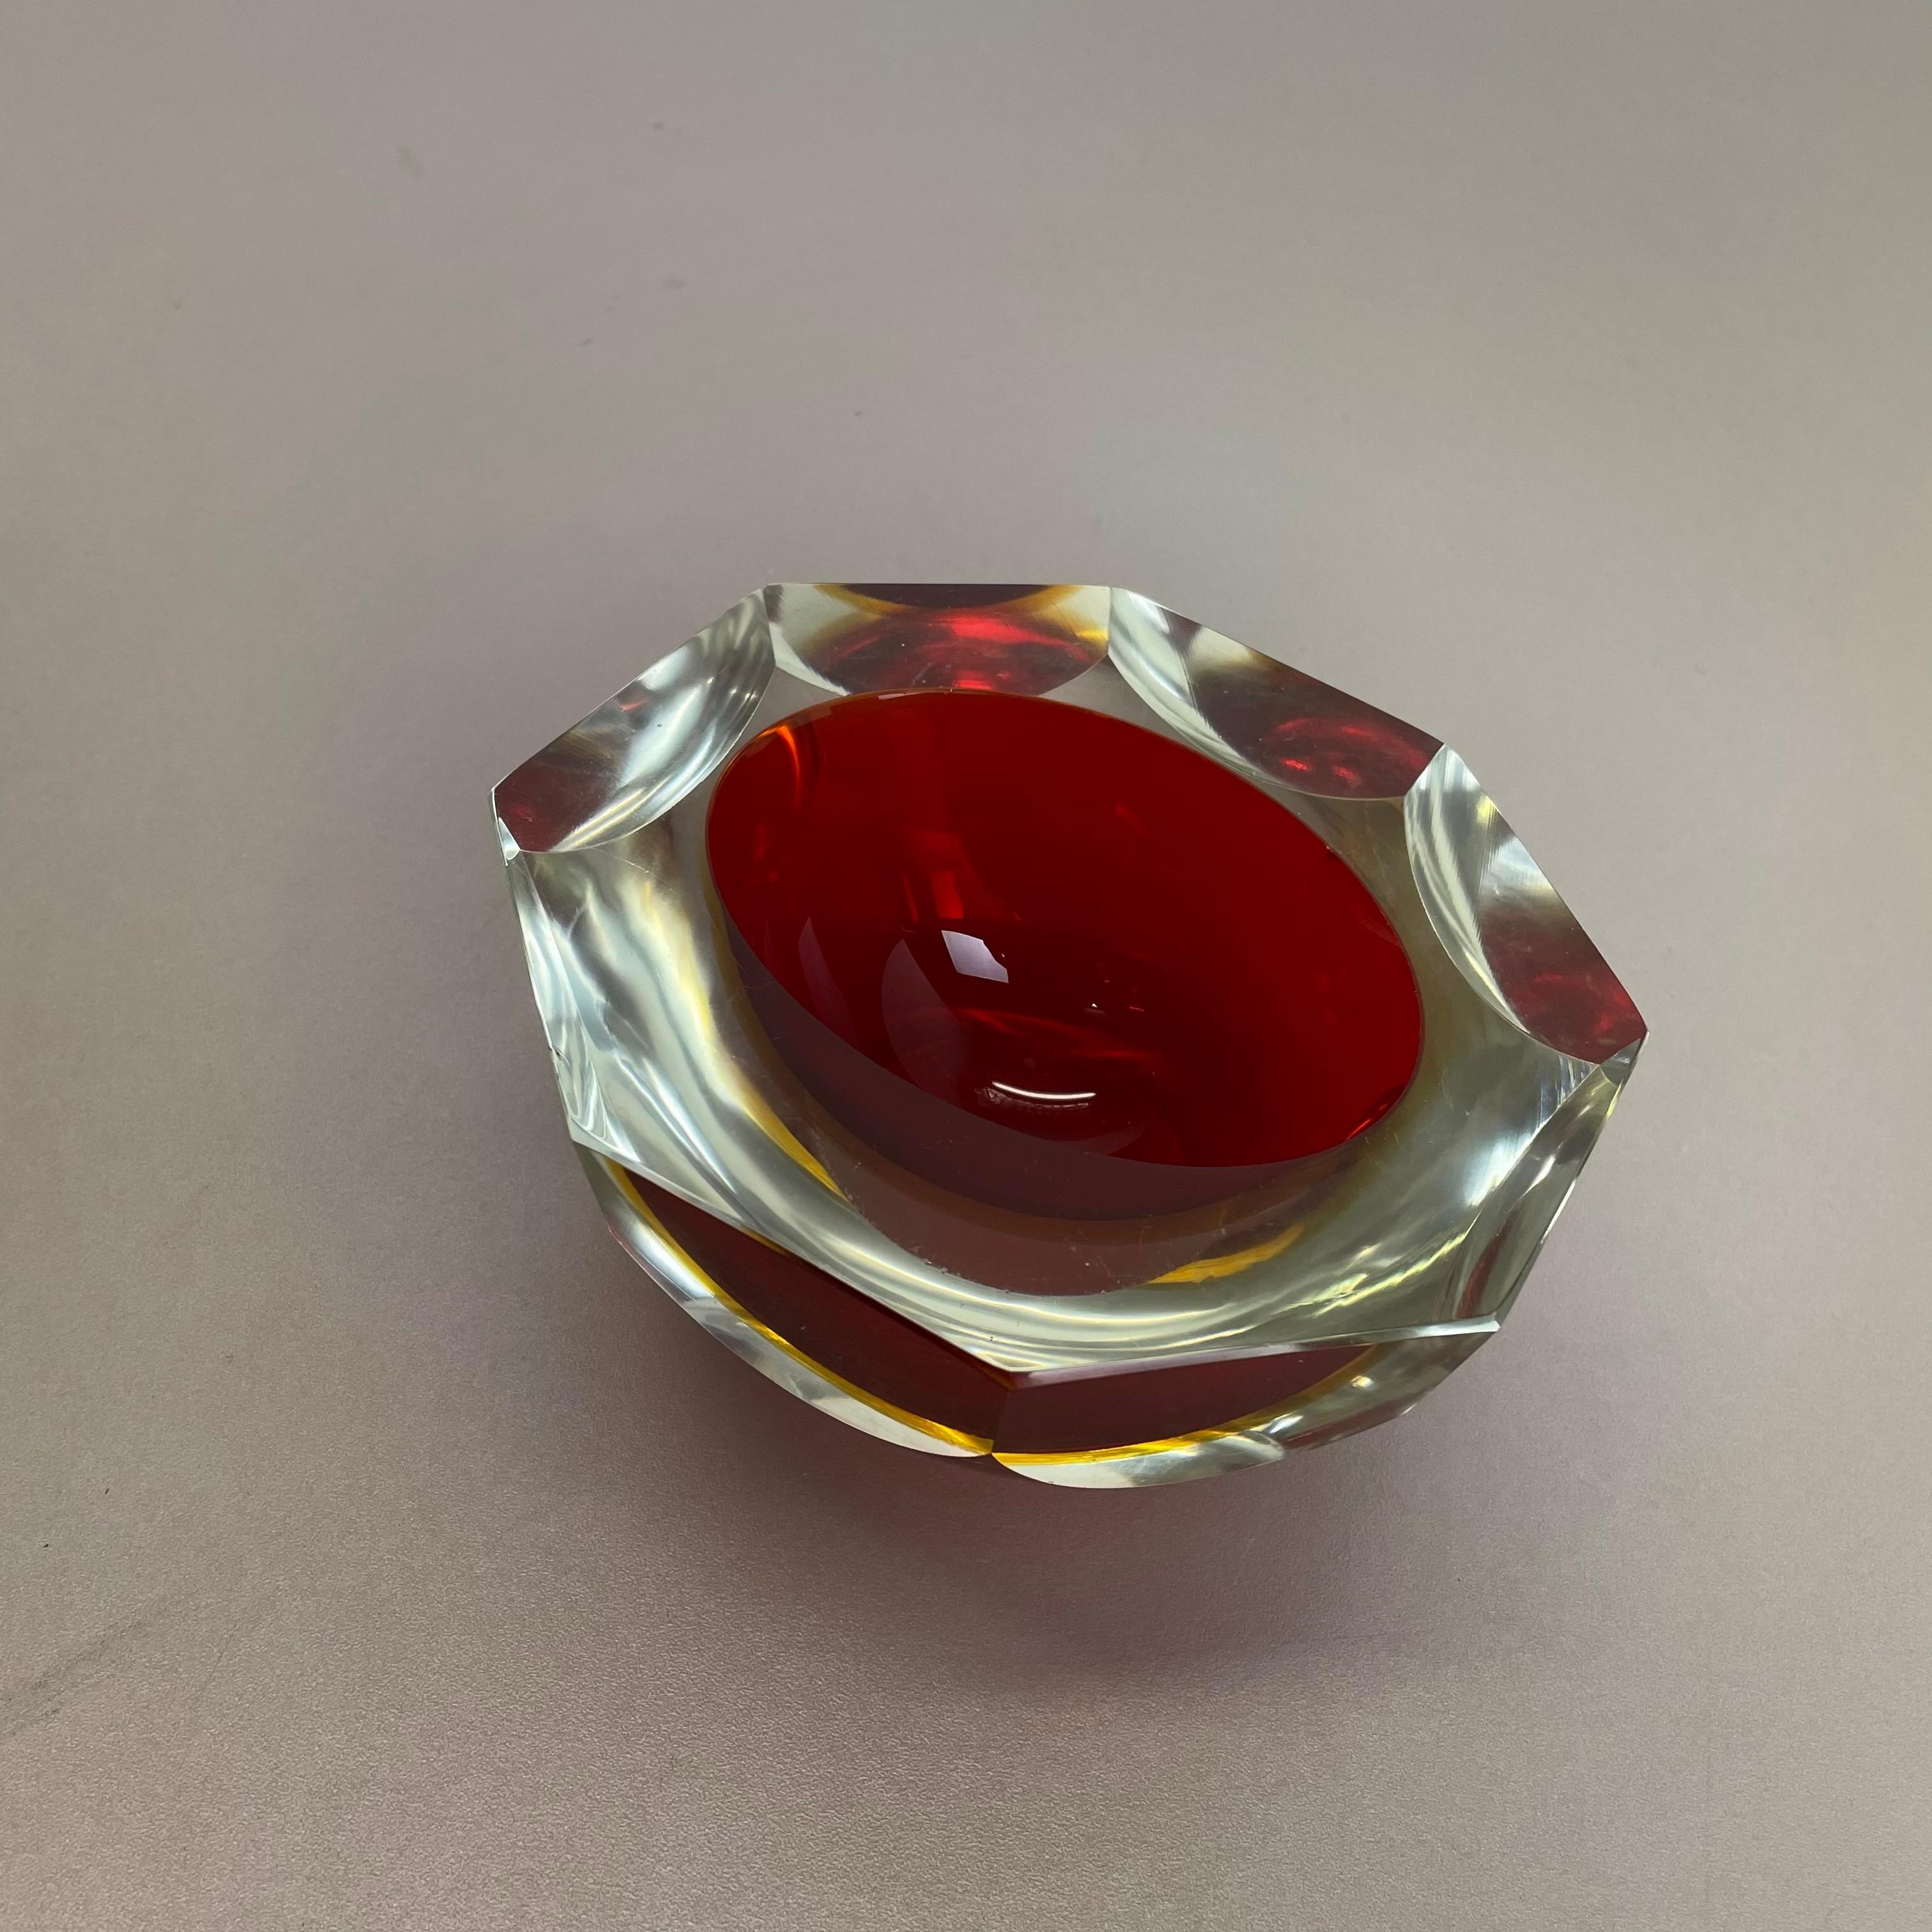 Glass Faceted Sommerso Bowl Element Ashtray Flavio Poli Attributed Murano, Italy 2